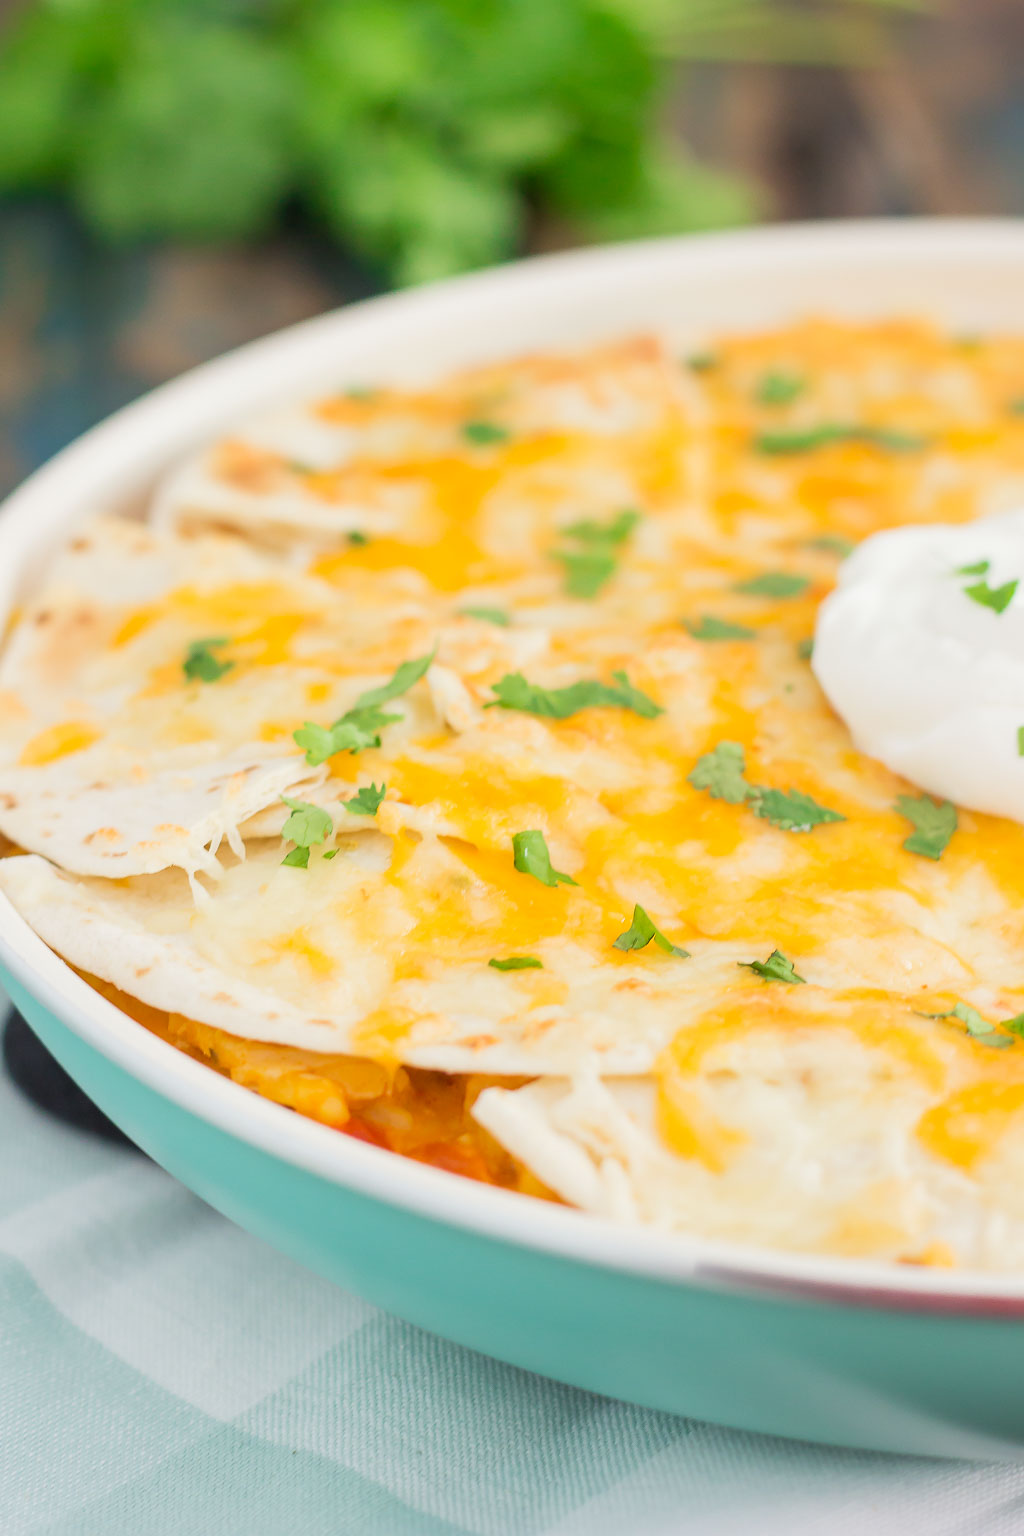 This One Pan Chicken Enchilada Bake is loaded with shredded chicken, hearty rice, and topped with cheesy tortillas. It contains the classic flavor of enchiladas, but in casserole form. Made in one pan and ready in just 30 minutes, you'll have this simple dish ready to be devoured in no time!